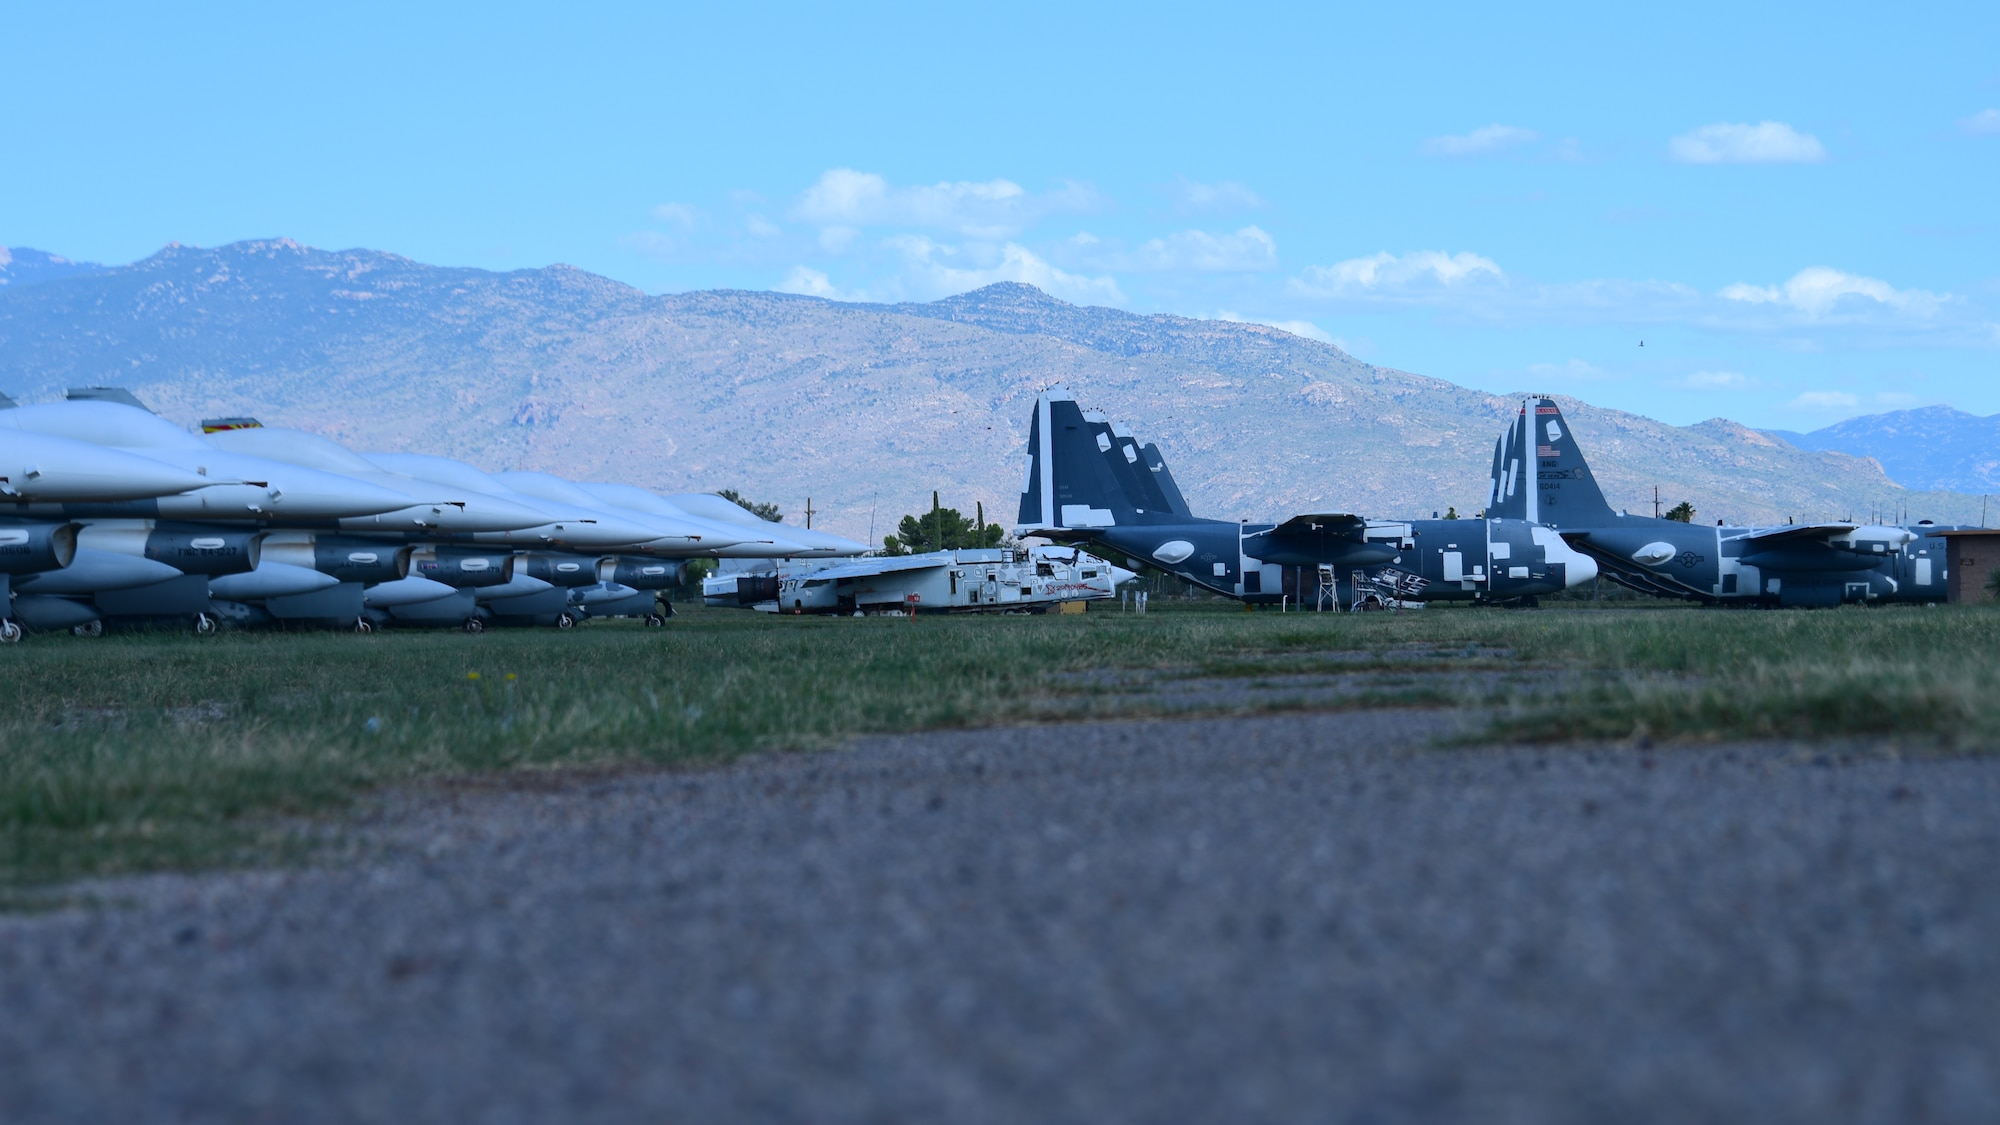 U.S. Air Force F-16 Fighting Falcons and C-130 Hercules sit in the 309th Aircraft Maintenance and Regeneration Group at Davis-Monthan Air Force Base, Arizona, Sept. 20, 2019. The AMARG houses aircraft from across the Department of Defense and other government agencies including NASA. (U.S. Air Force photo by Airman 1st Class Jacob T. Stephens)